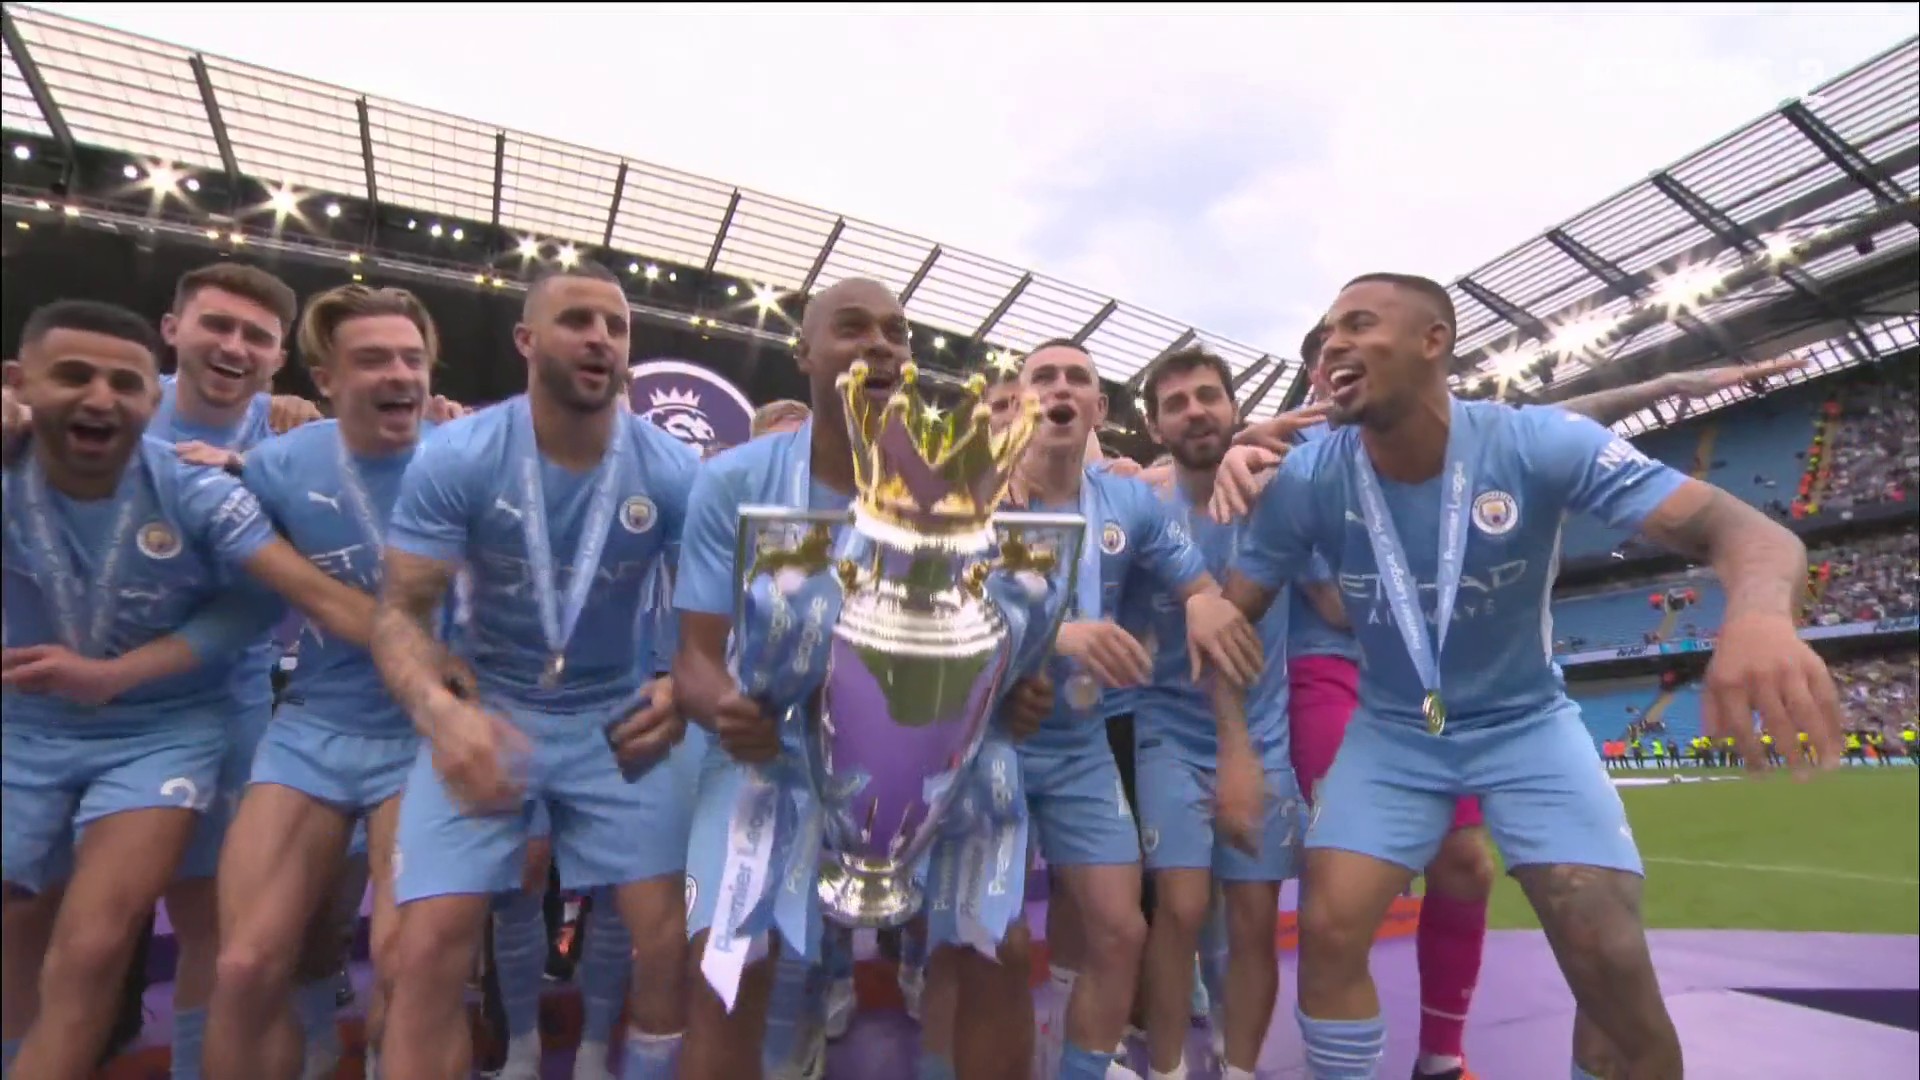 MAN CITY U12 crown the winners of the u12 premier league cup! After be, Man City